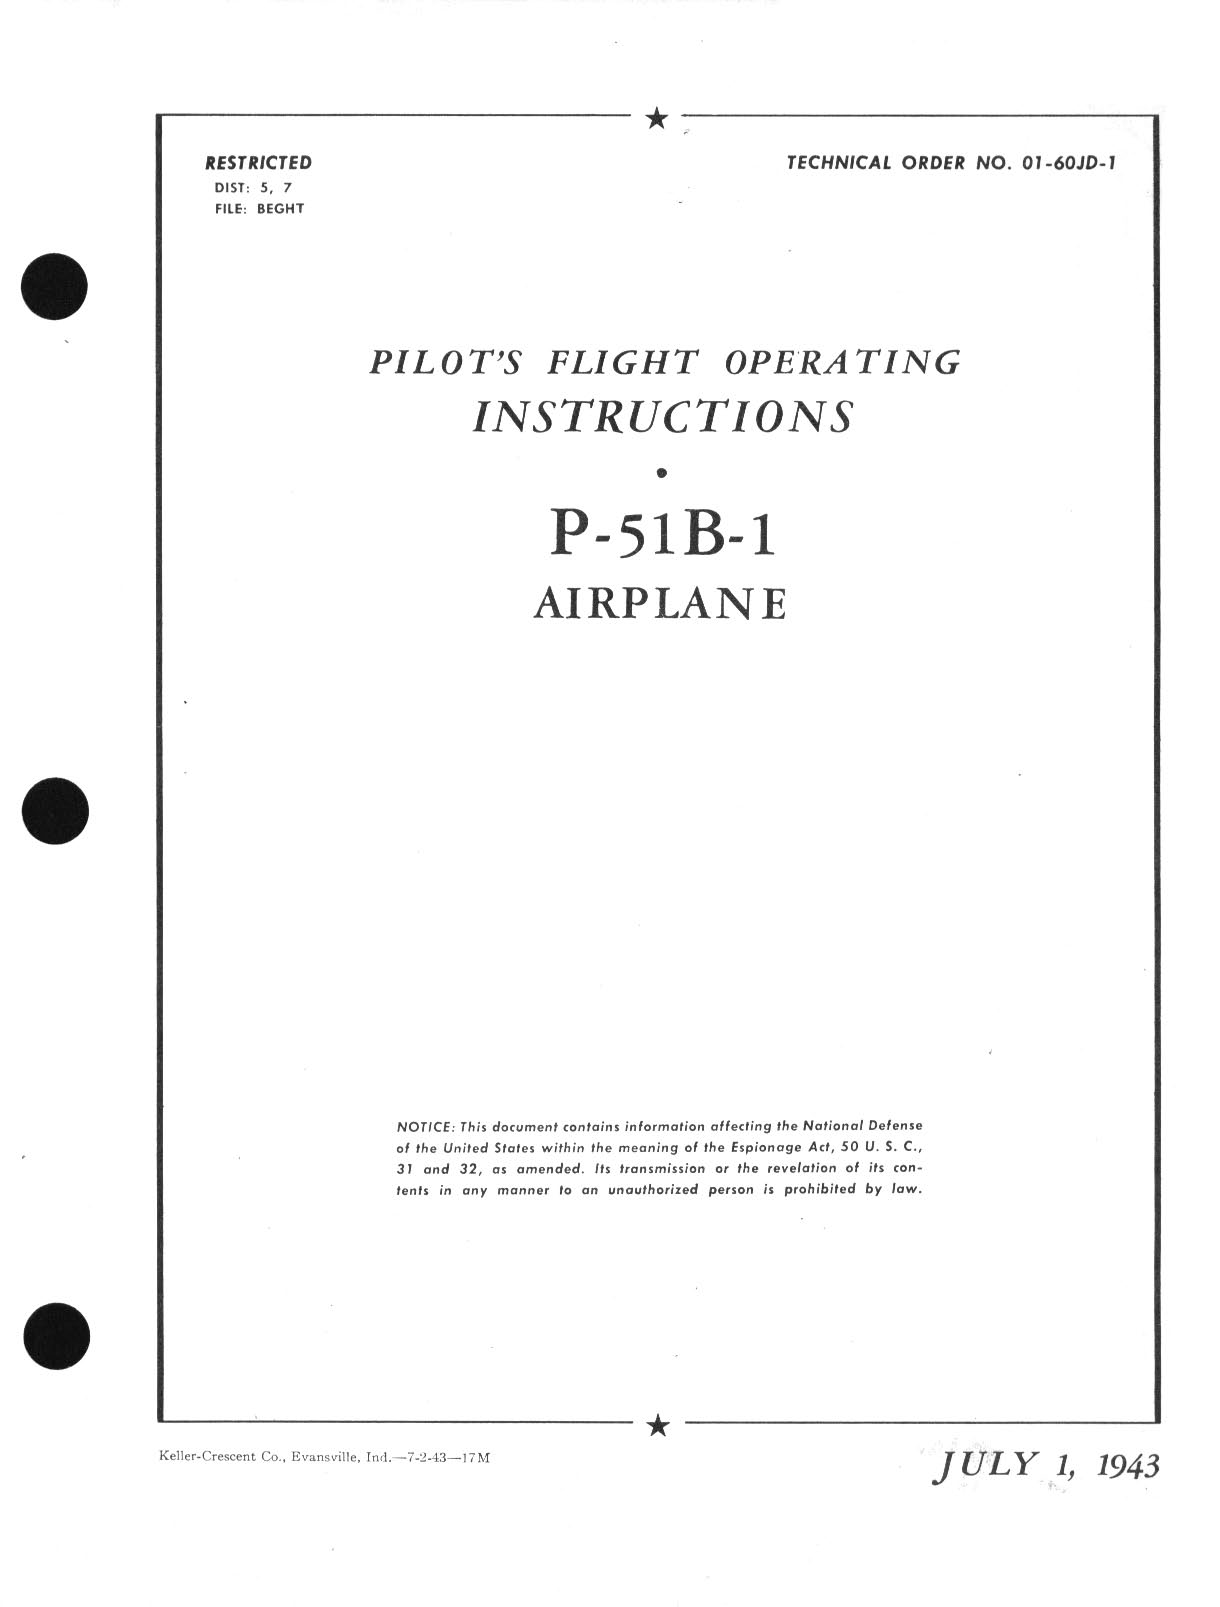 Sample page 1 from AirCorps Library document: Pilot's Flight Operating Instructions P-51B-1 Airplane